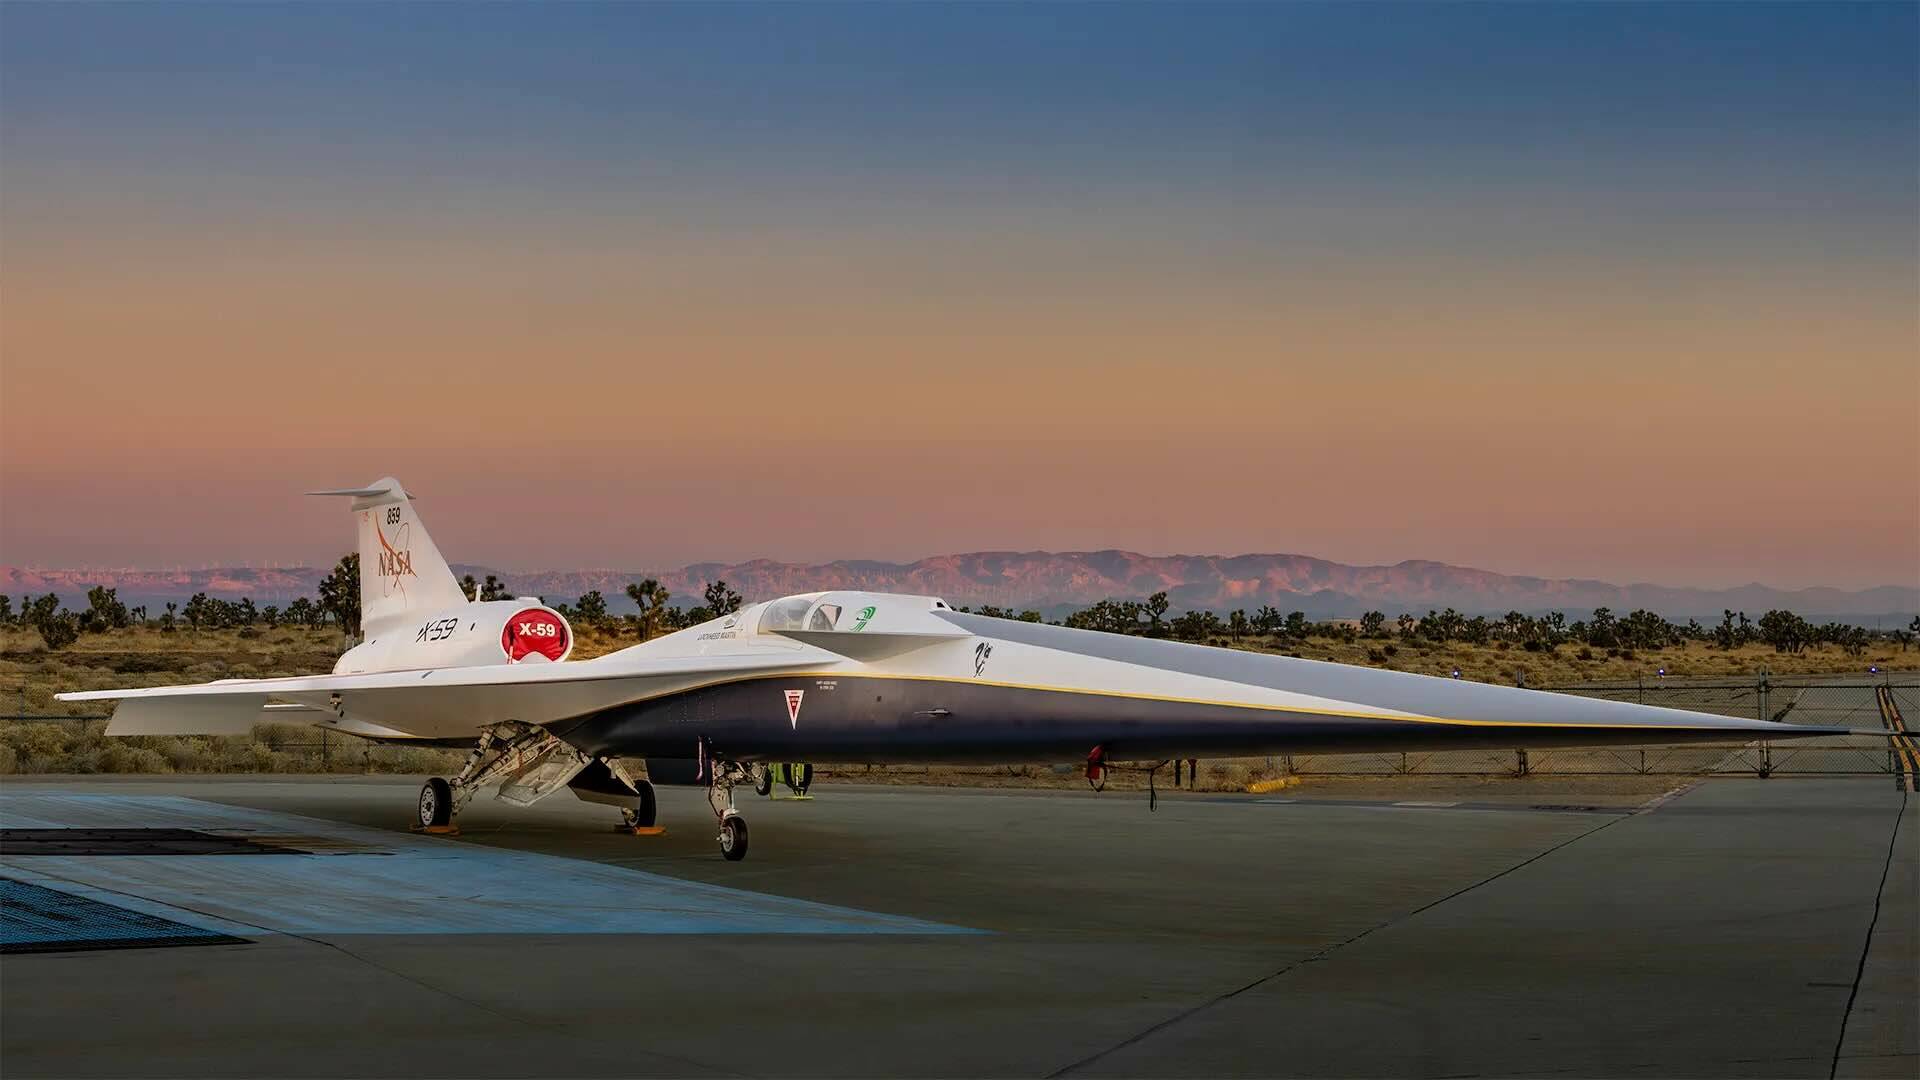 Revolutionary X-59 Plane Revealed by NASA and Lockheed Martin, Promises Quiet Supersonic Travel